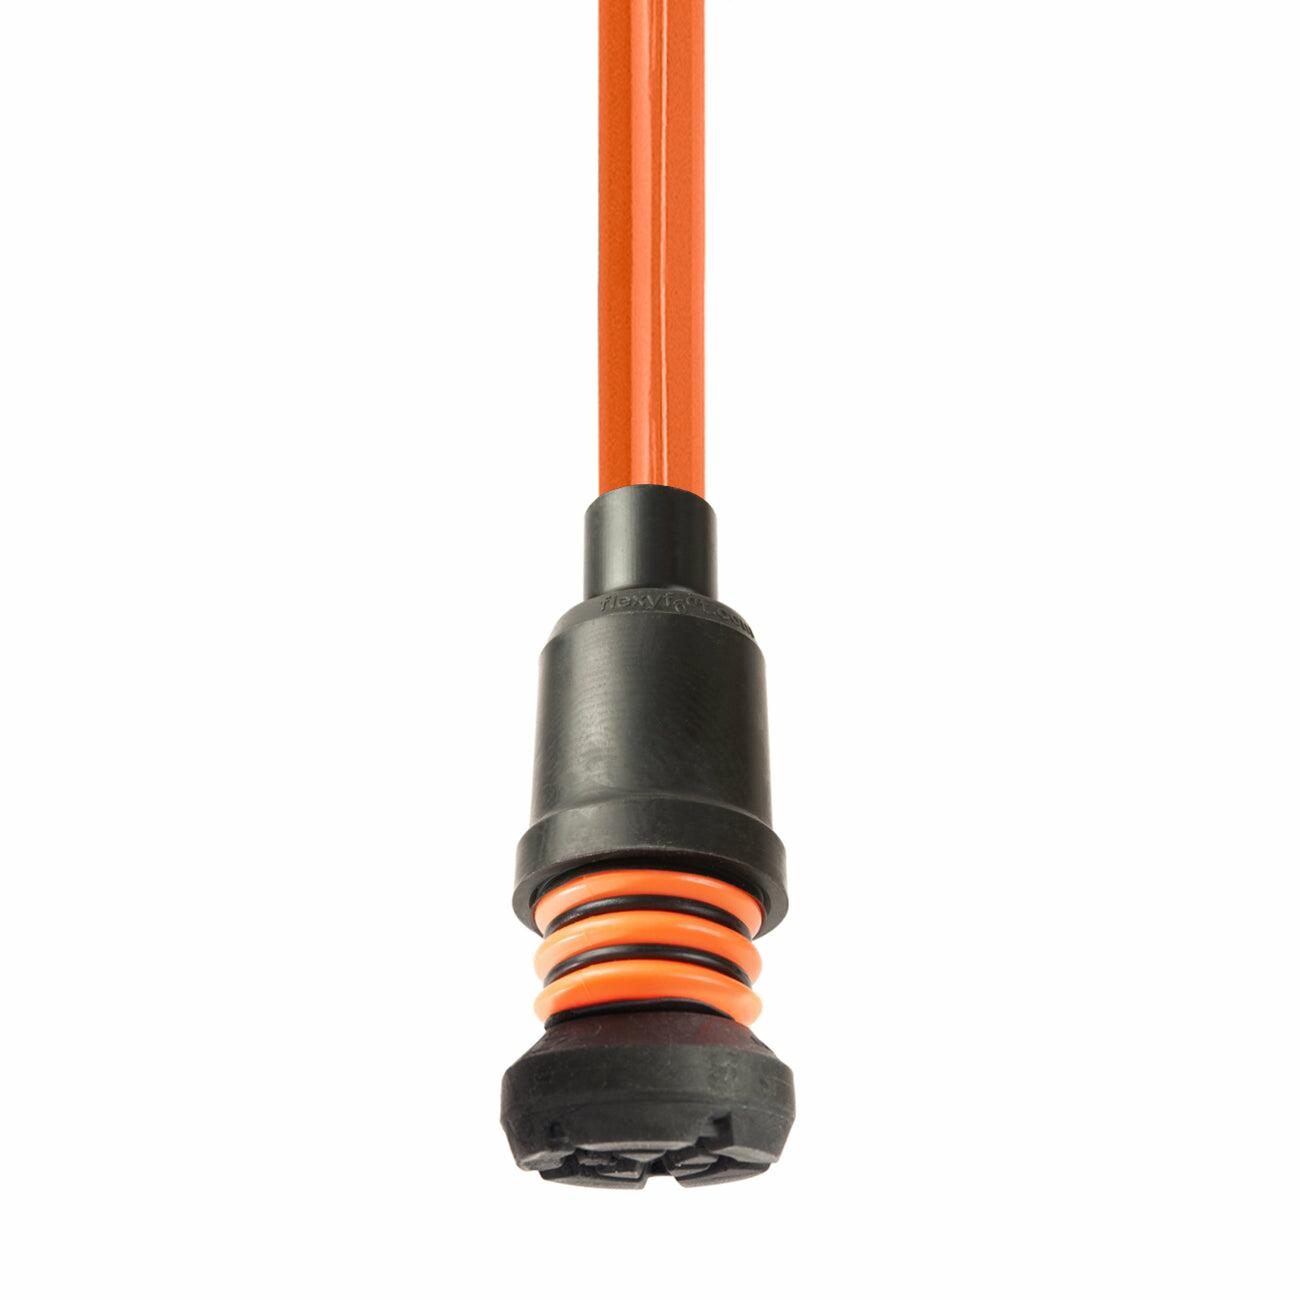 An orange Flexyfoot Comfort Grip Double Adjustable Crutch tipped with a Flexyfoot ferrule